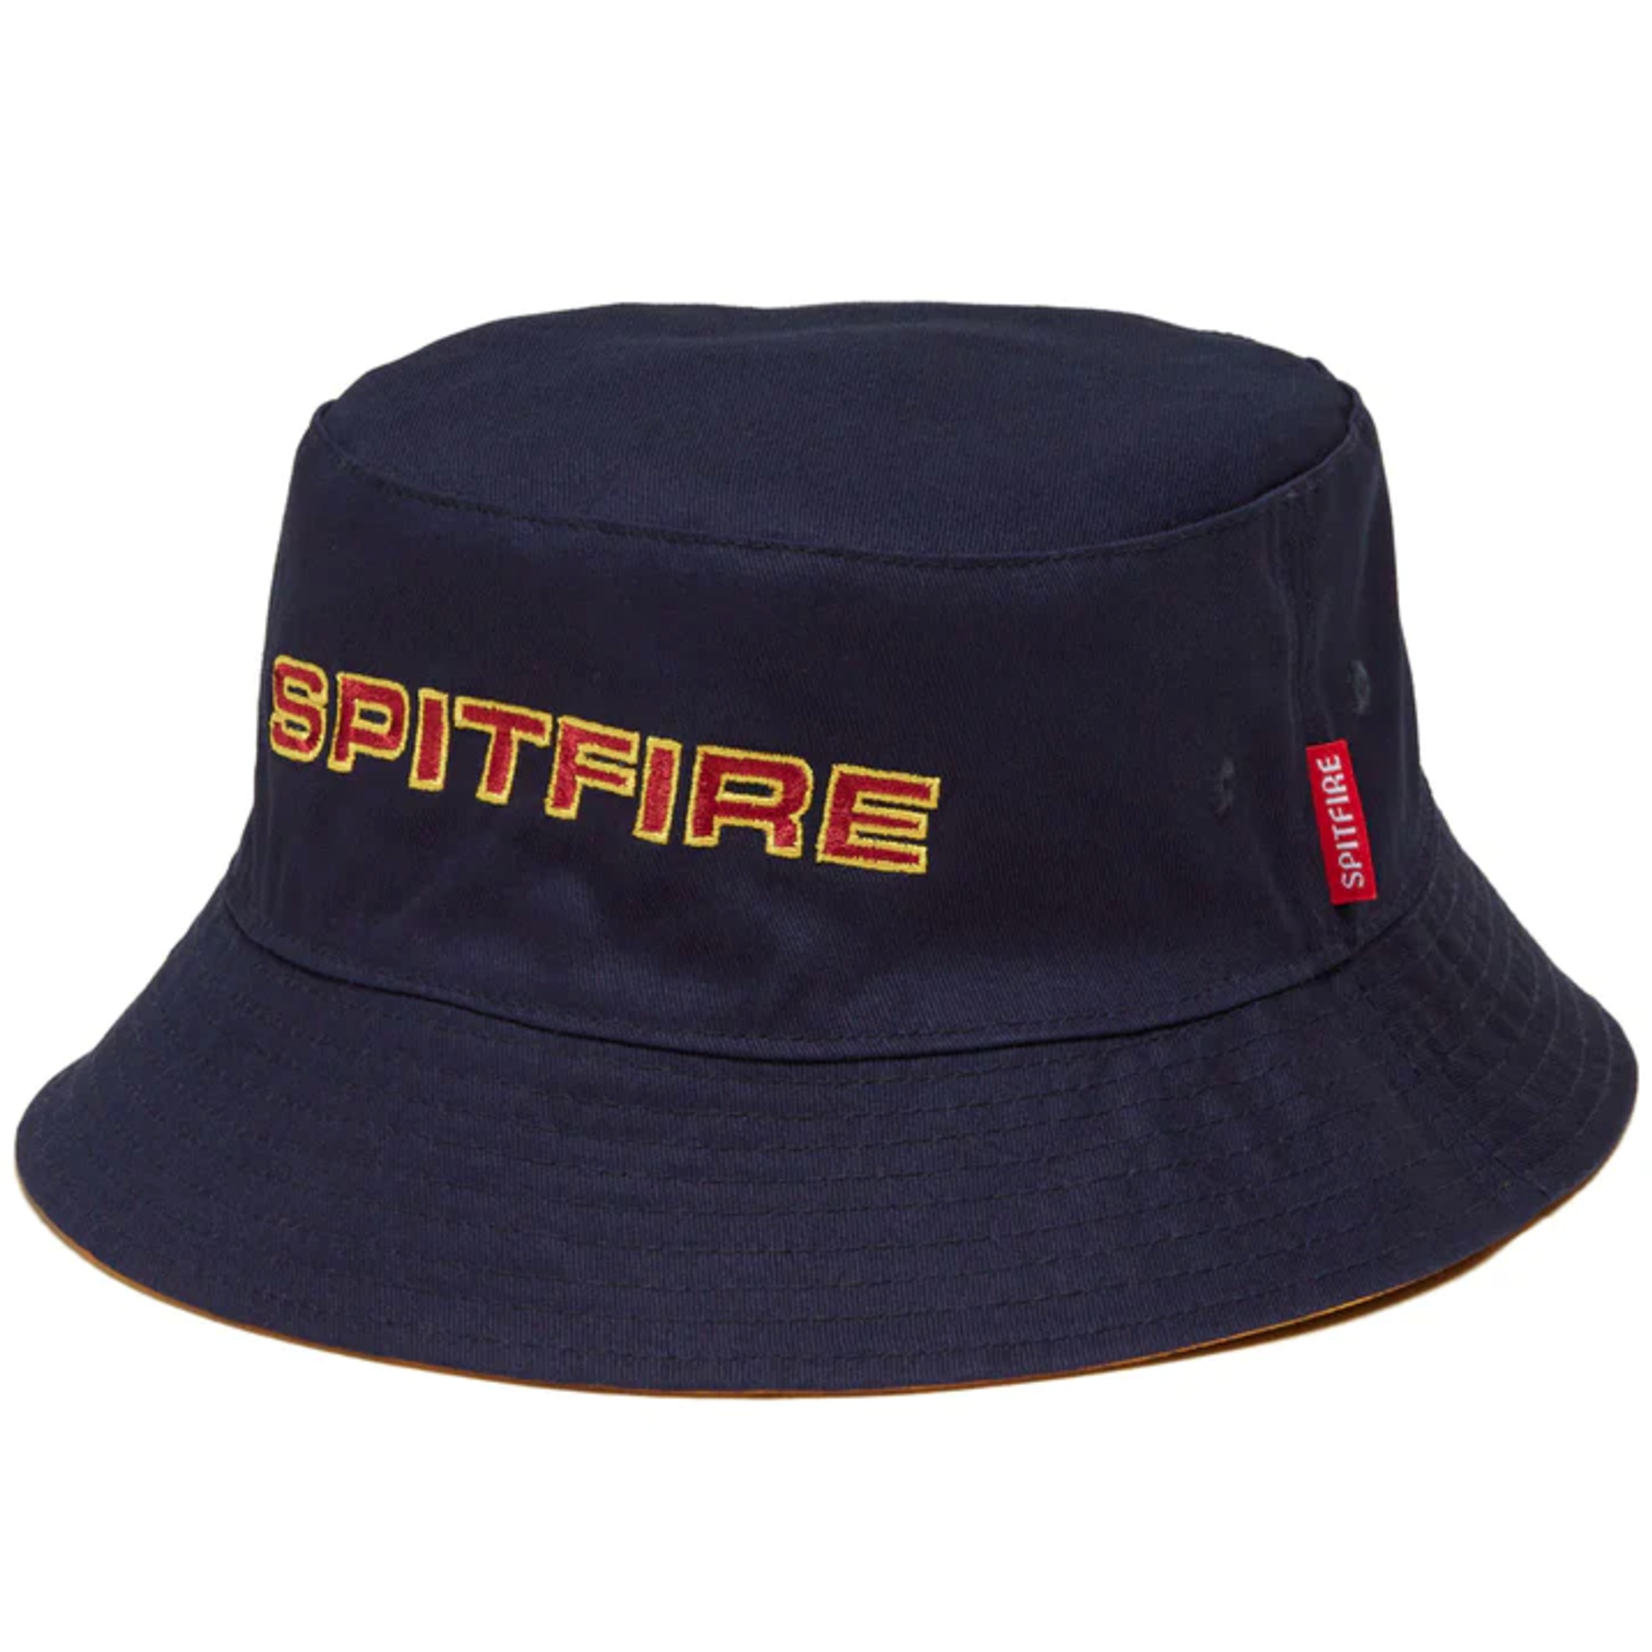 Spitfire Spitfire Classic 87 Reversible Bucket Hat - Navy/Gold/Red